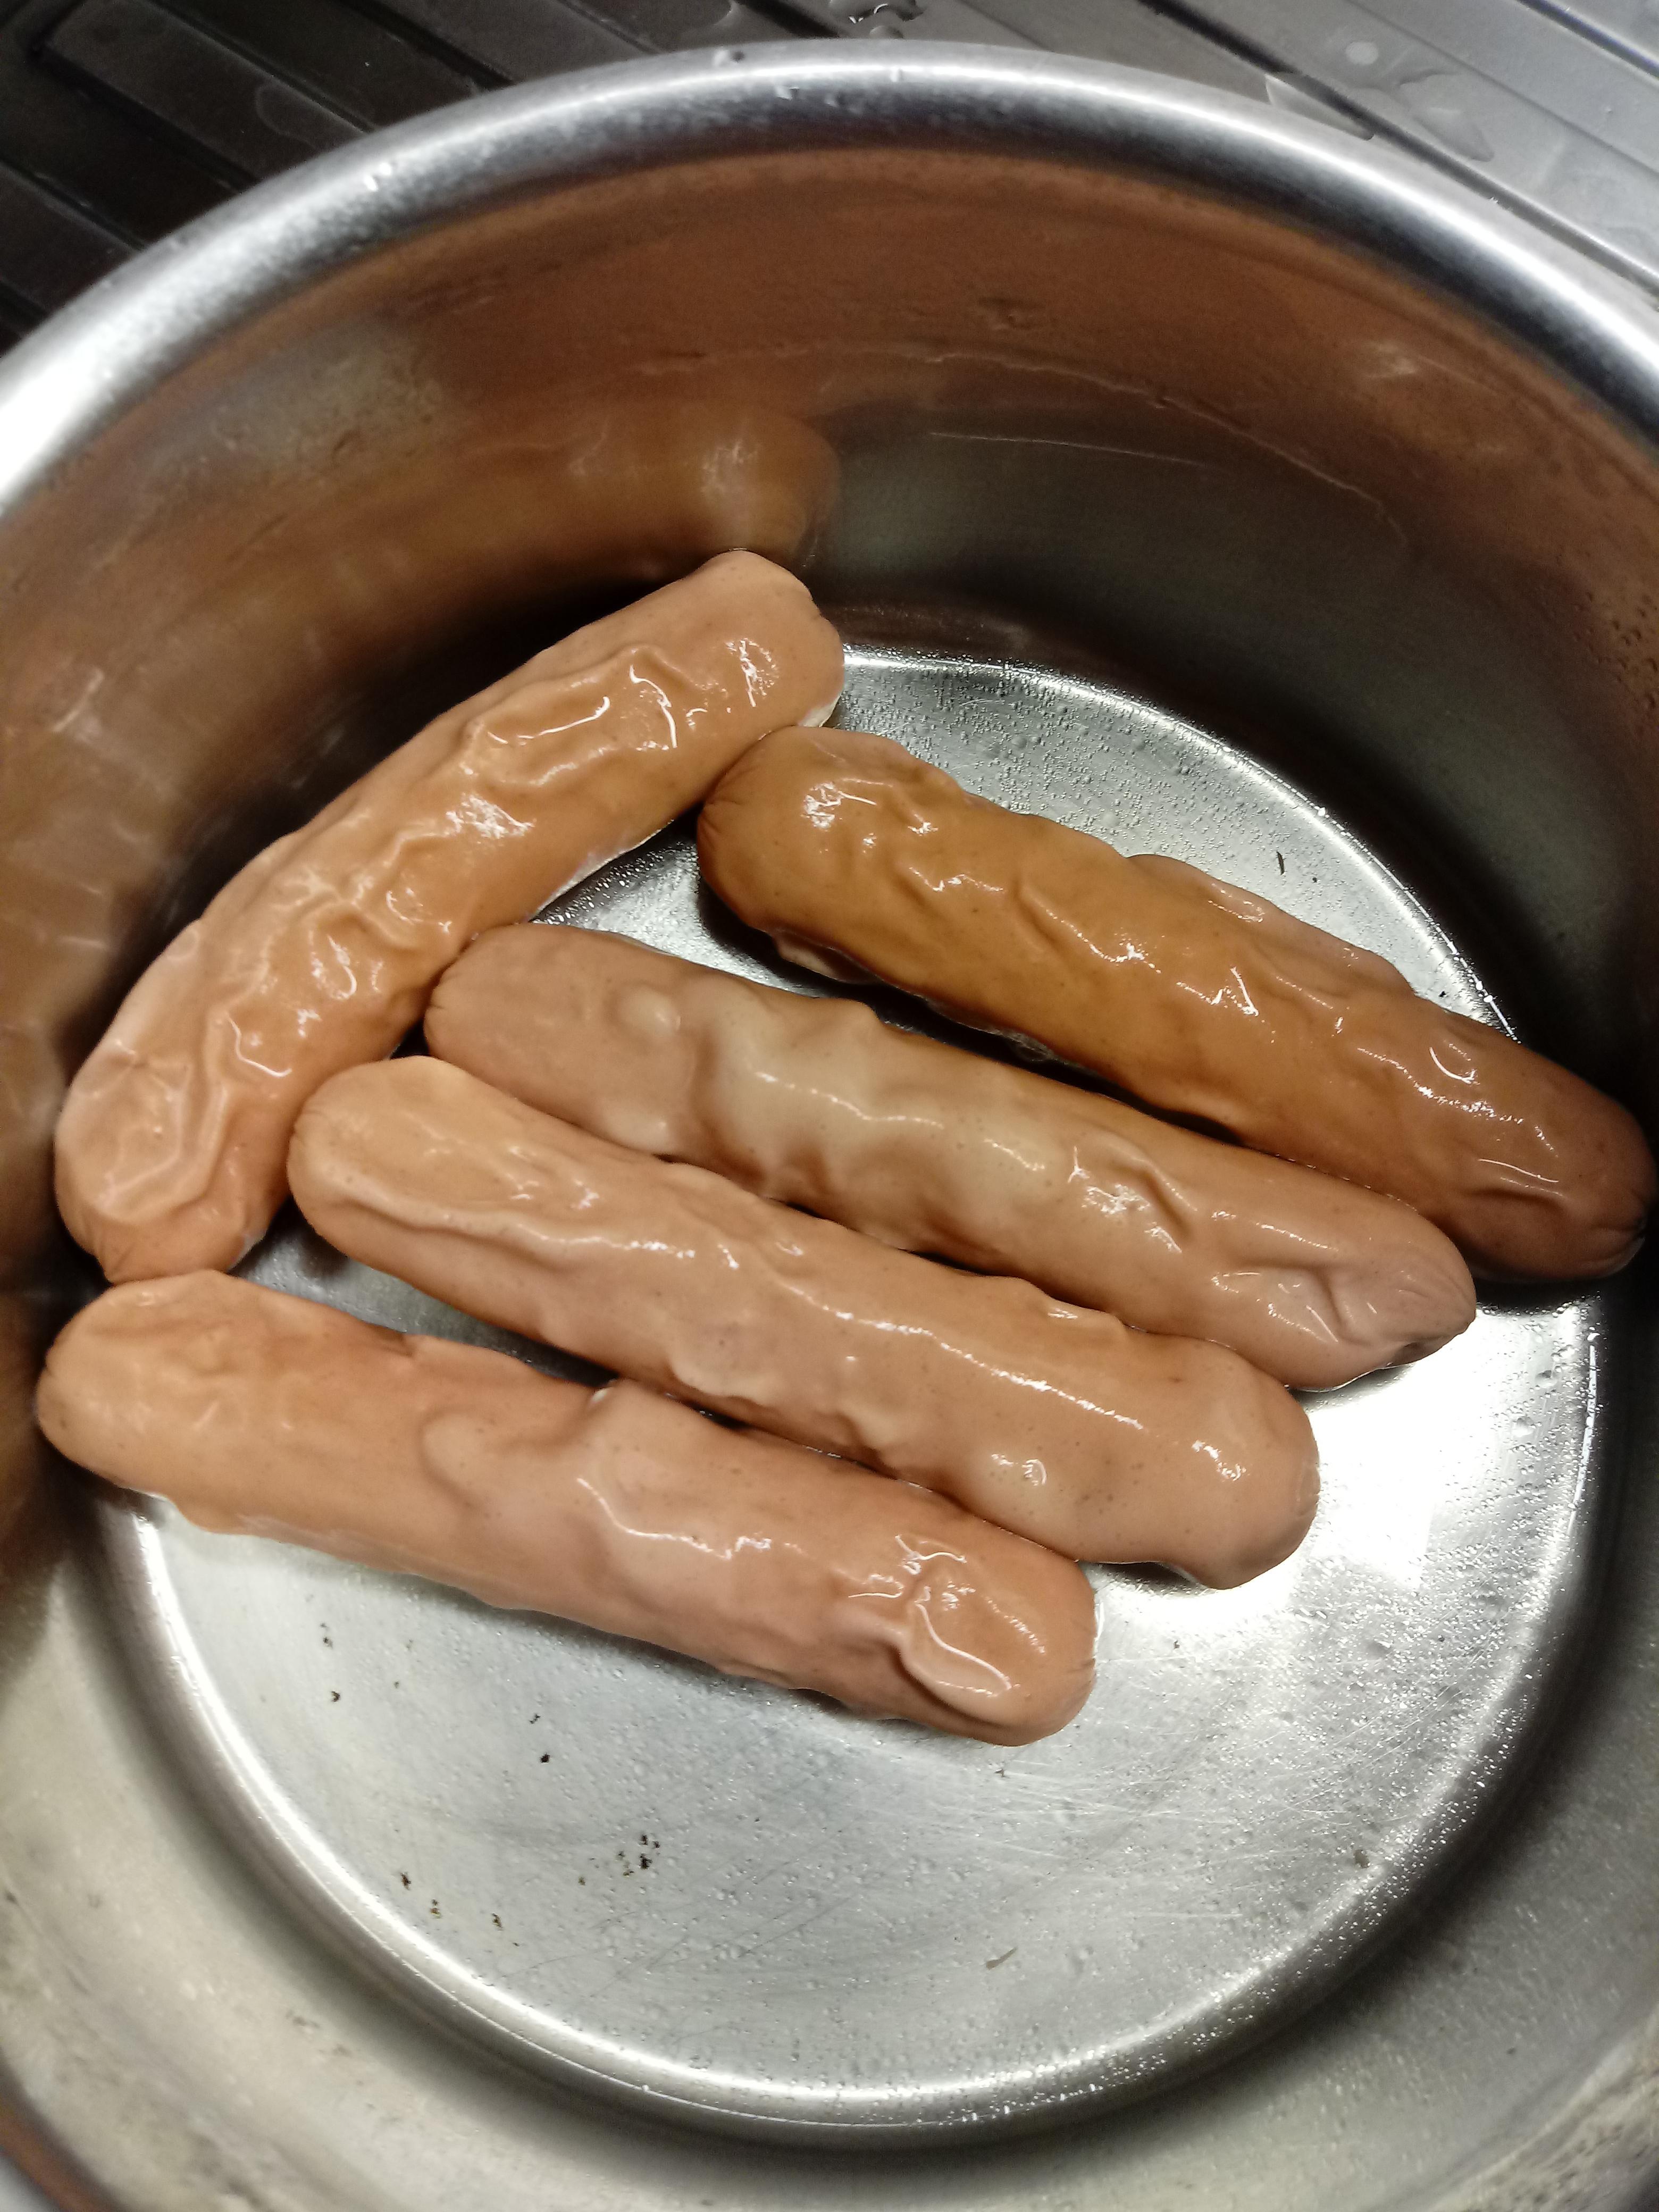 This is what vegetarians call "hot dogs."